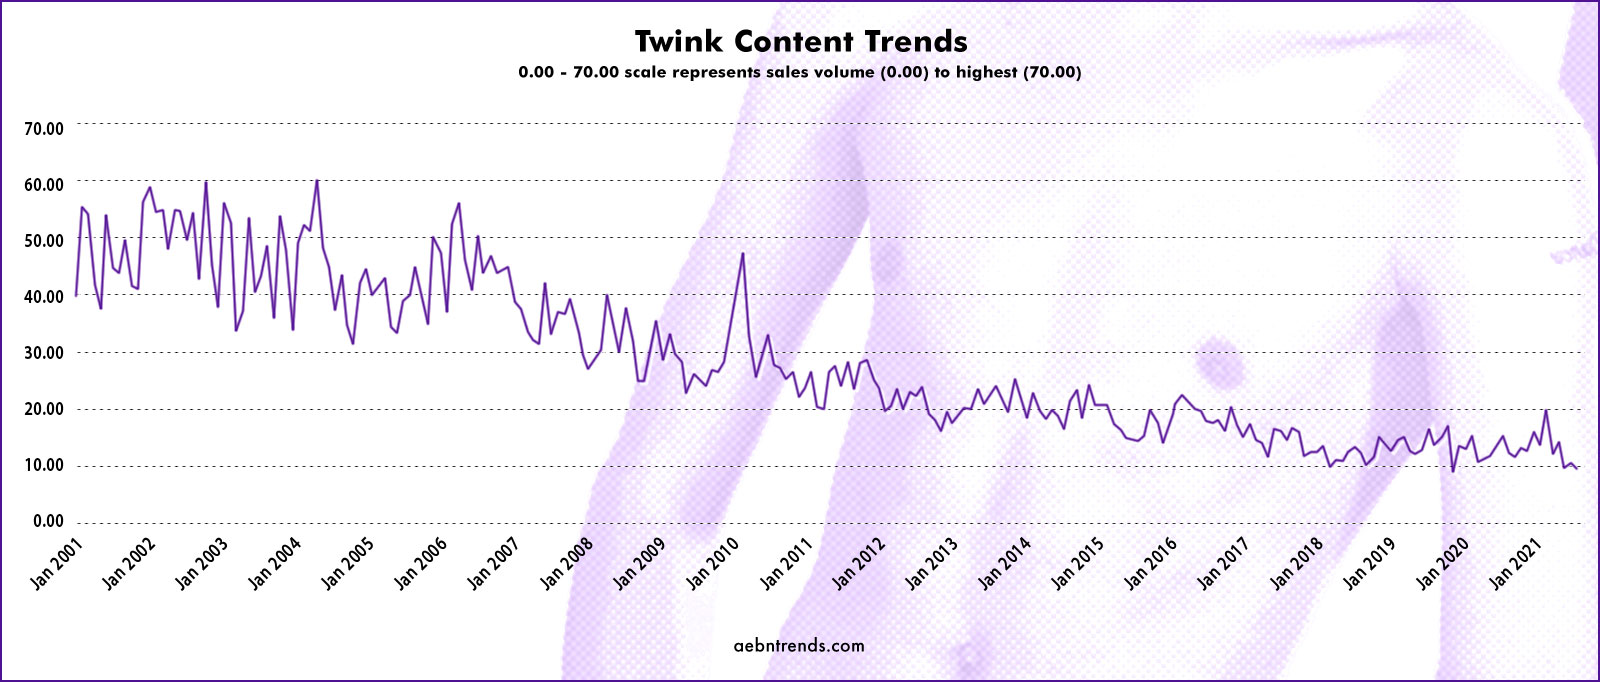 Twink Content Trends